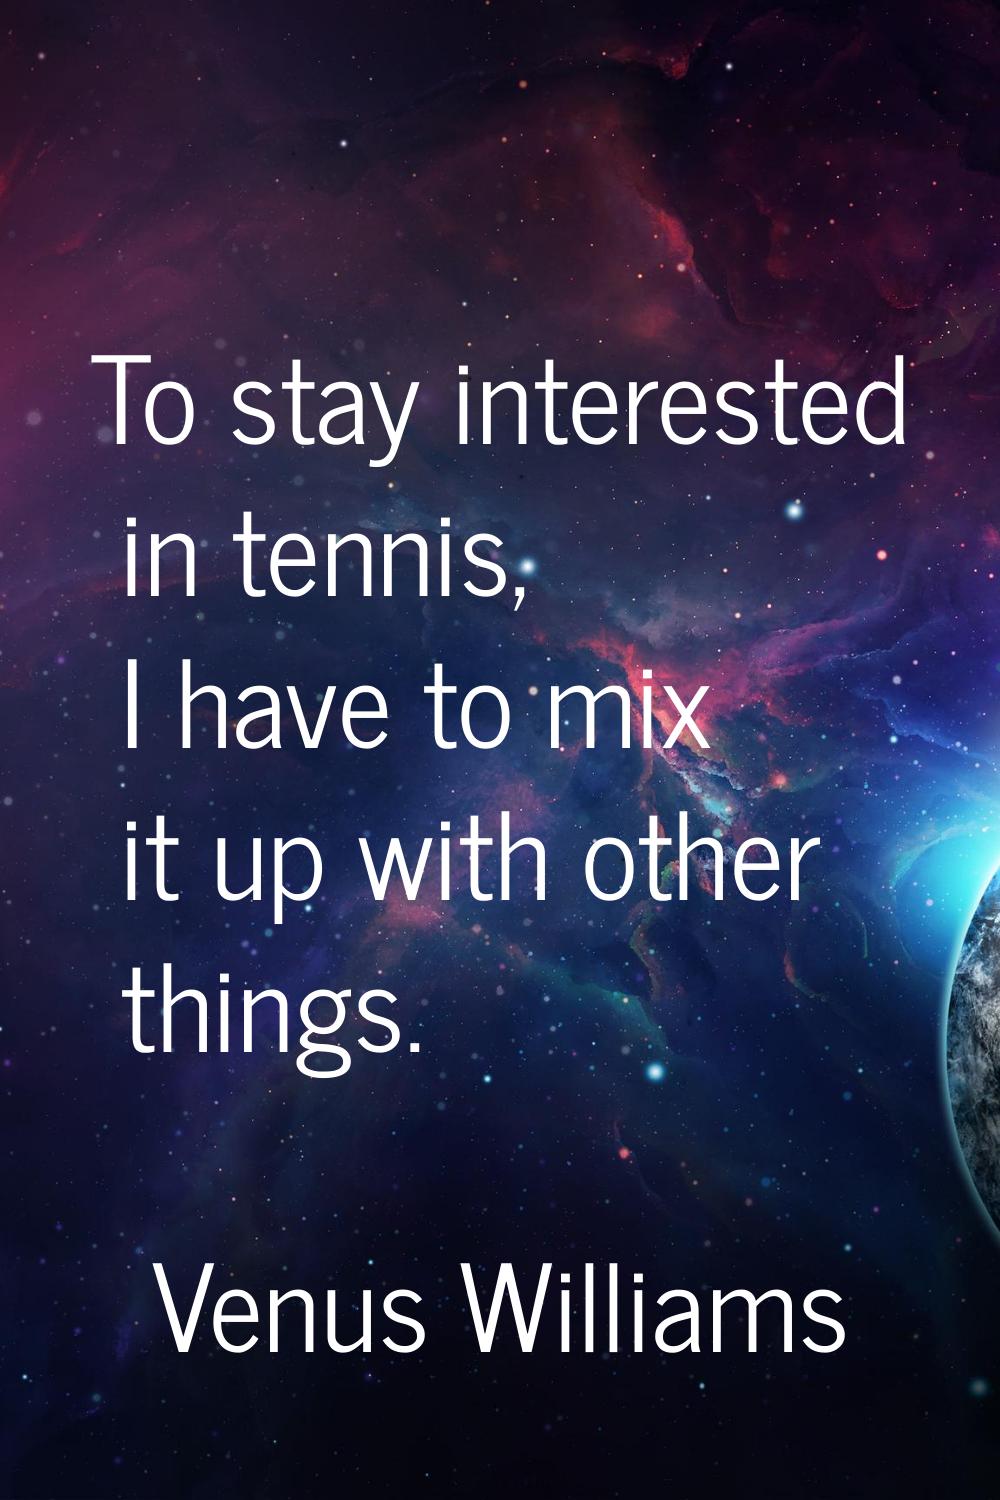 To stay interested in tennis, I have to mix it up with other things.